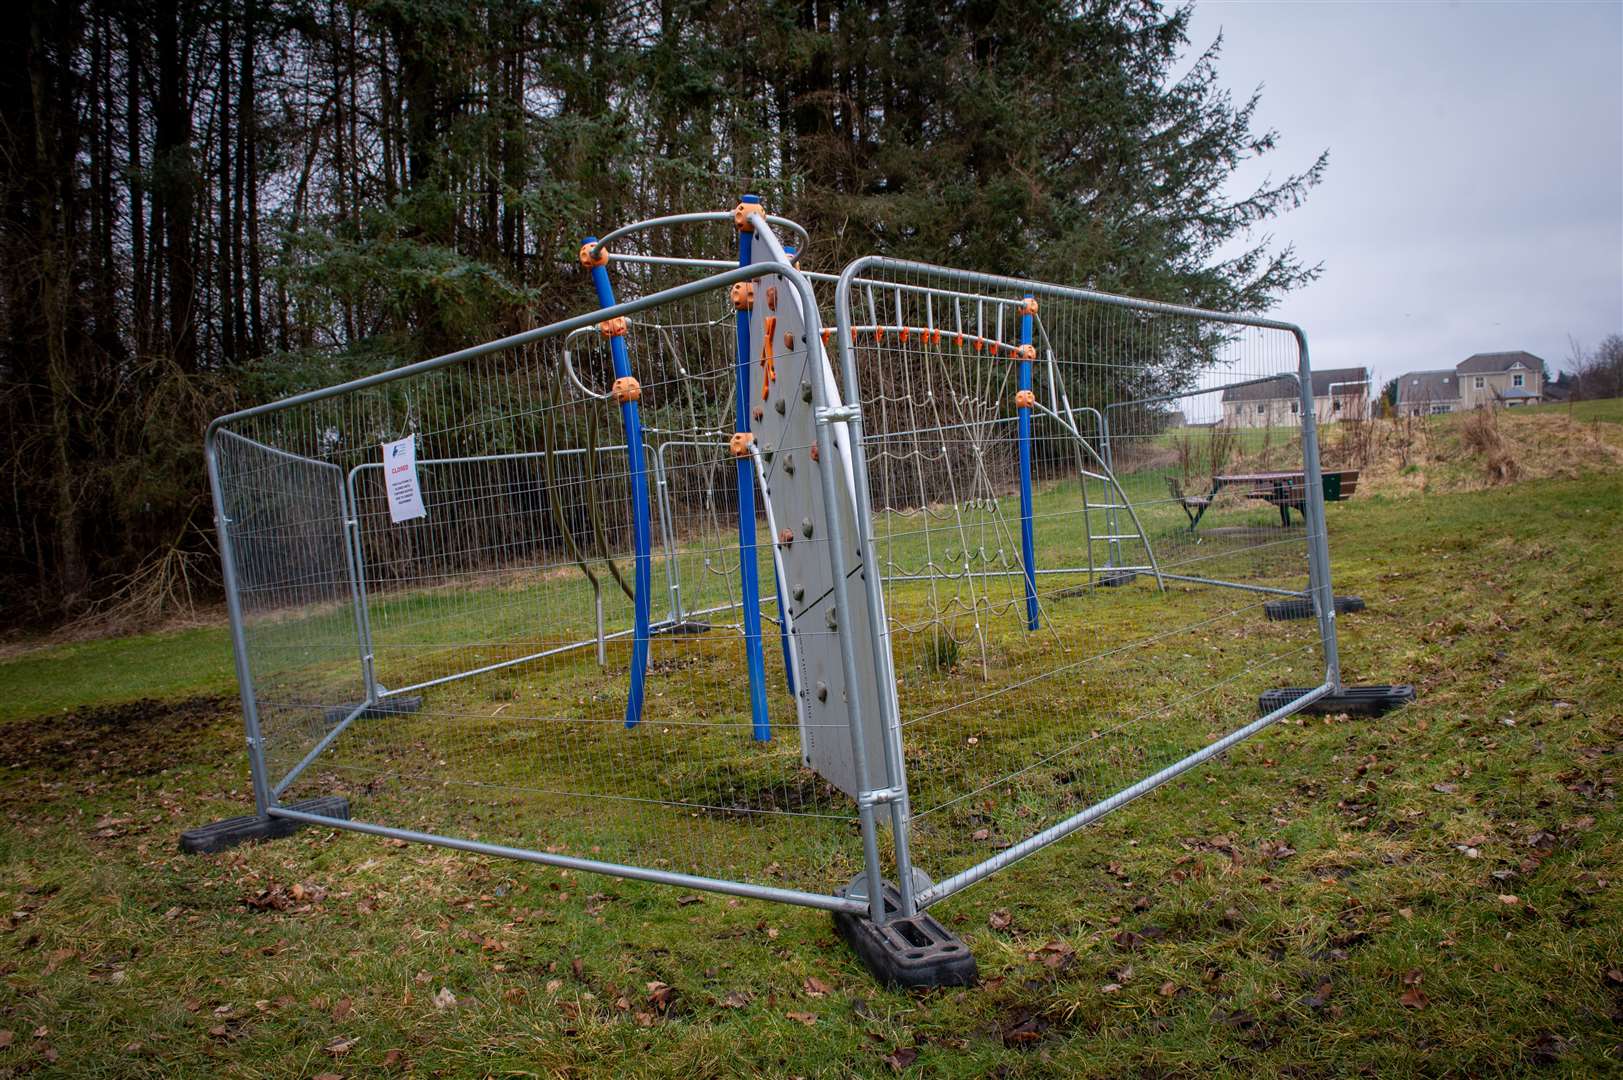 The temporary closure of play equipment at various locations in the Highlands earlier this year sparked anger.